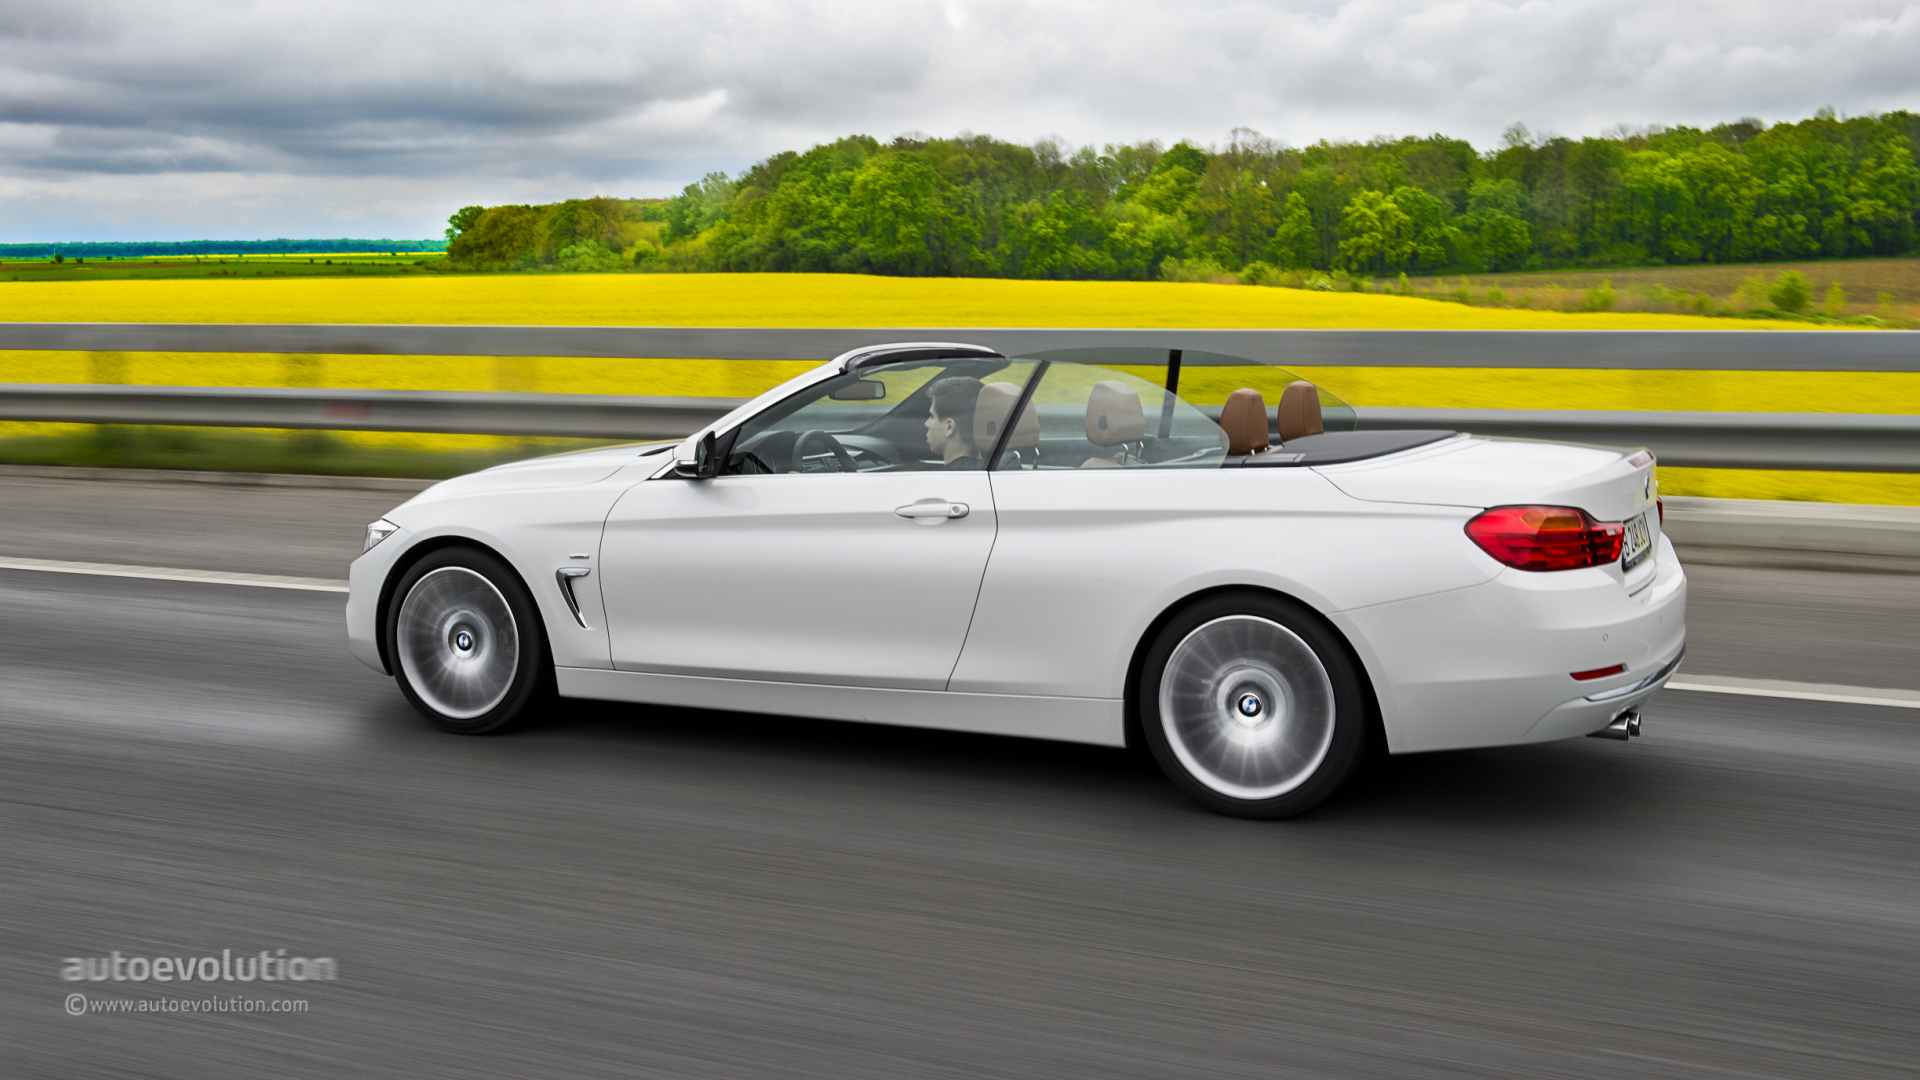 Bmw 4 Series Cabrio Wallpapers